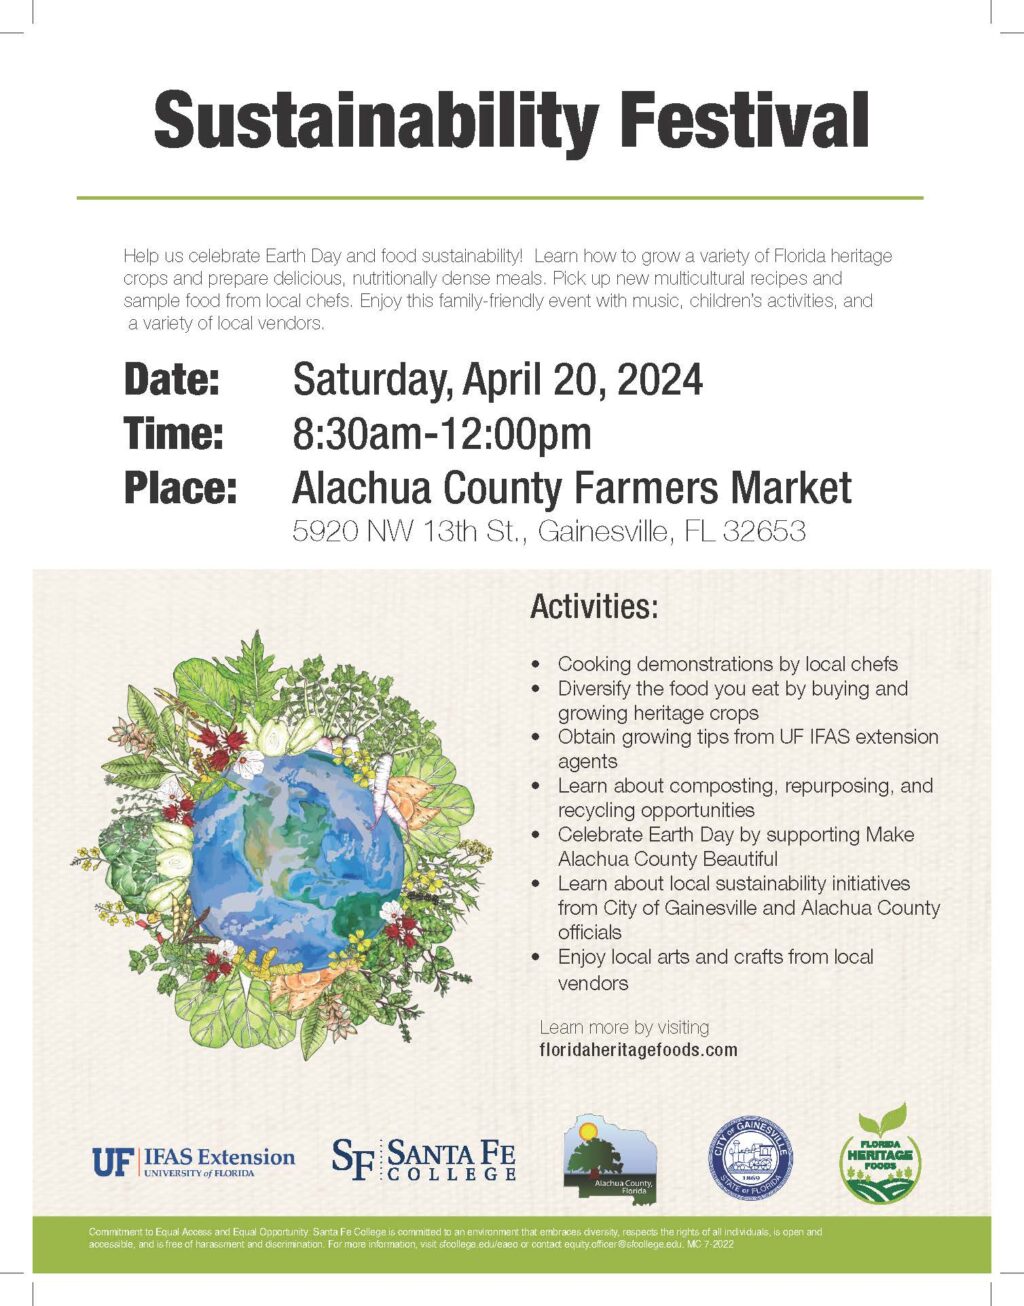 Event flier with image of the earth centered on North America, with various vegetables and herbs growing from all sides of it. Bottom of flier includes logos of participating organizations: UF IFAS Extension, Santa Fe College, Alachua County, City of Gainesville, and Florida Heritage Foods